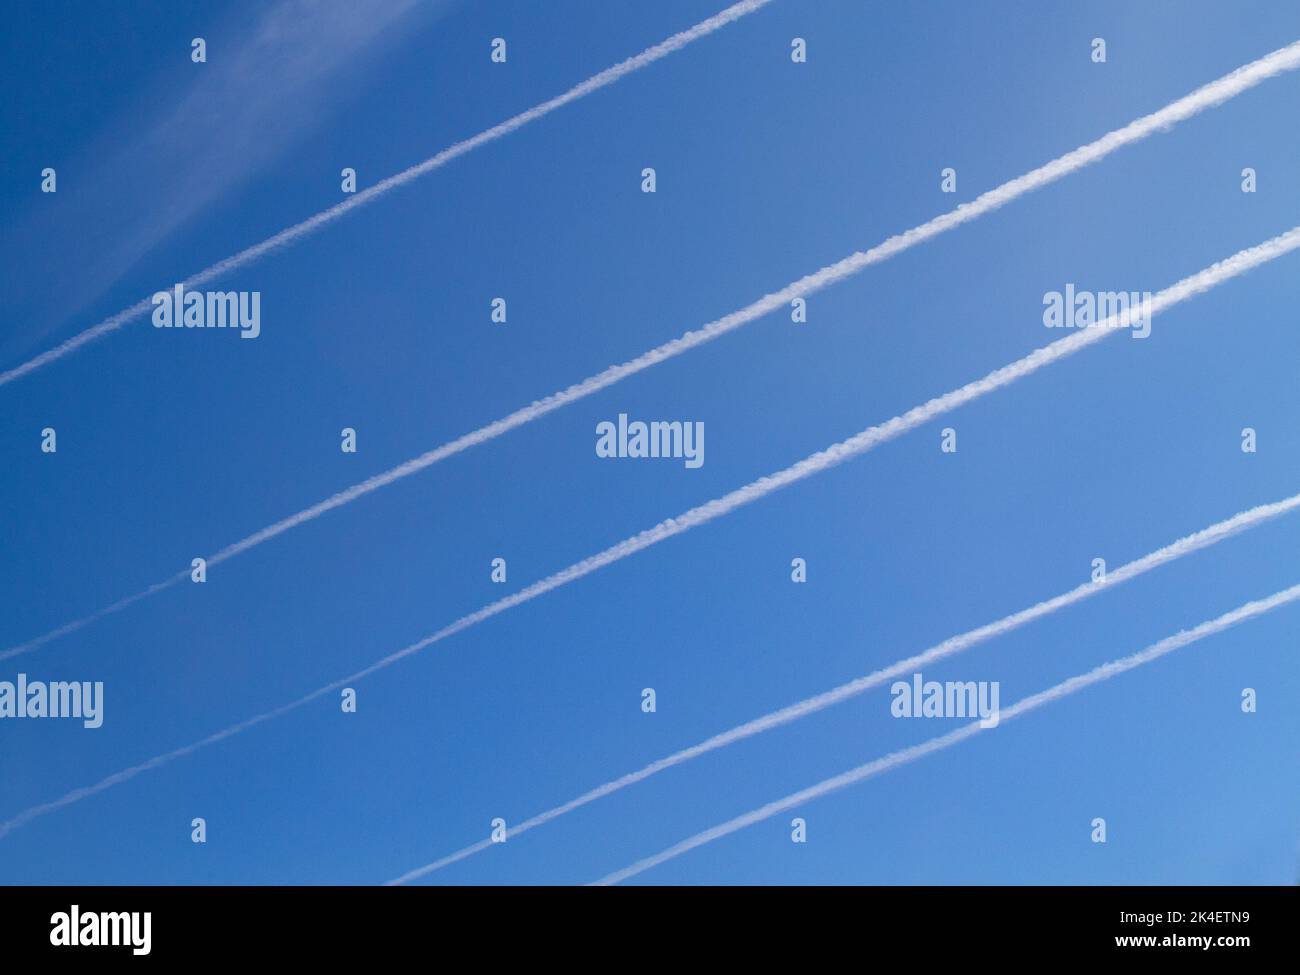 Five parallel condenstation trails, contrails or vapor trails in a blue sky Stock Photo